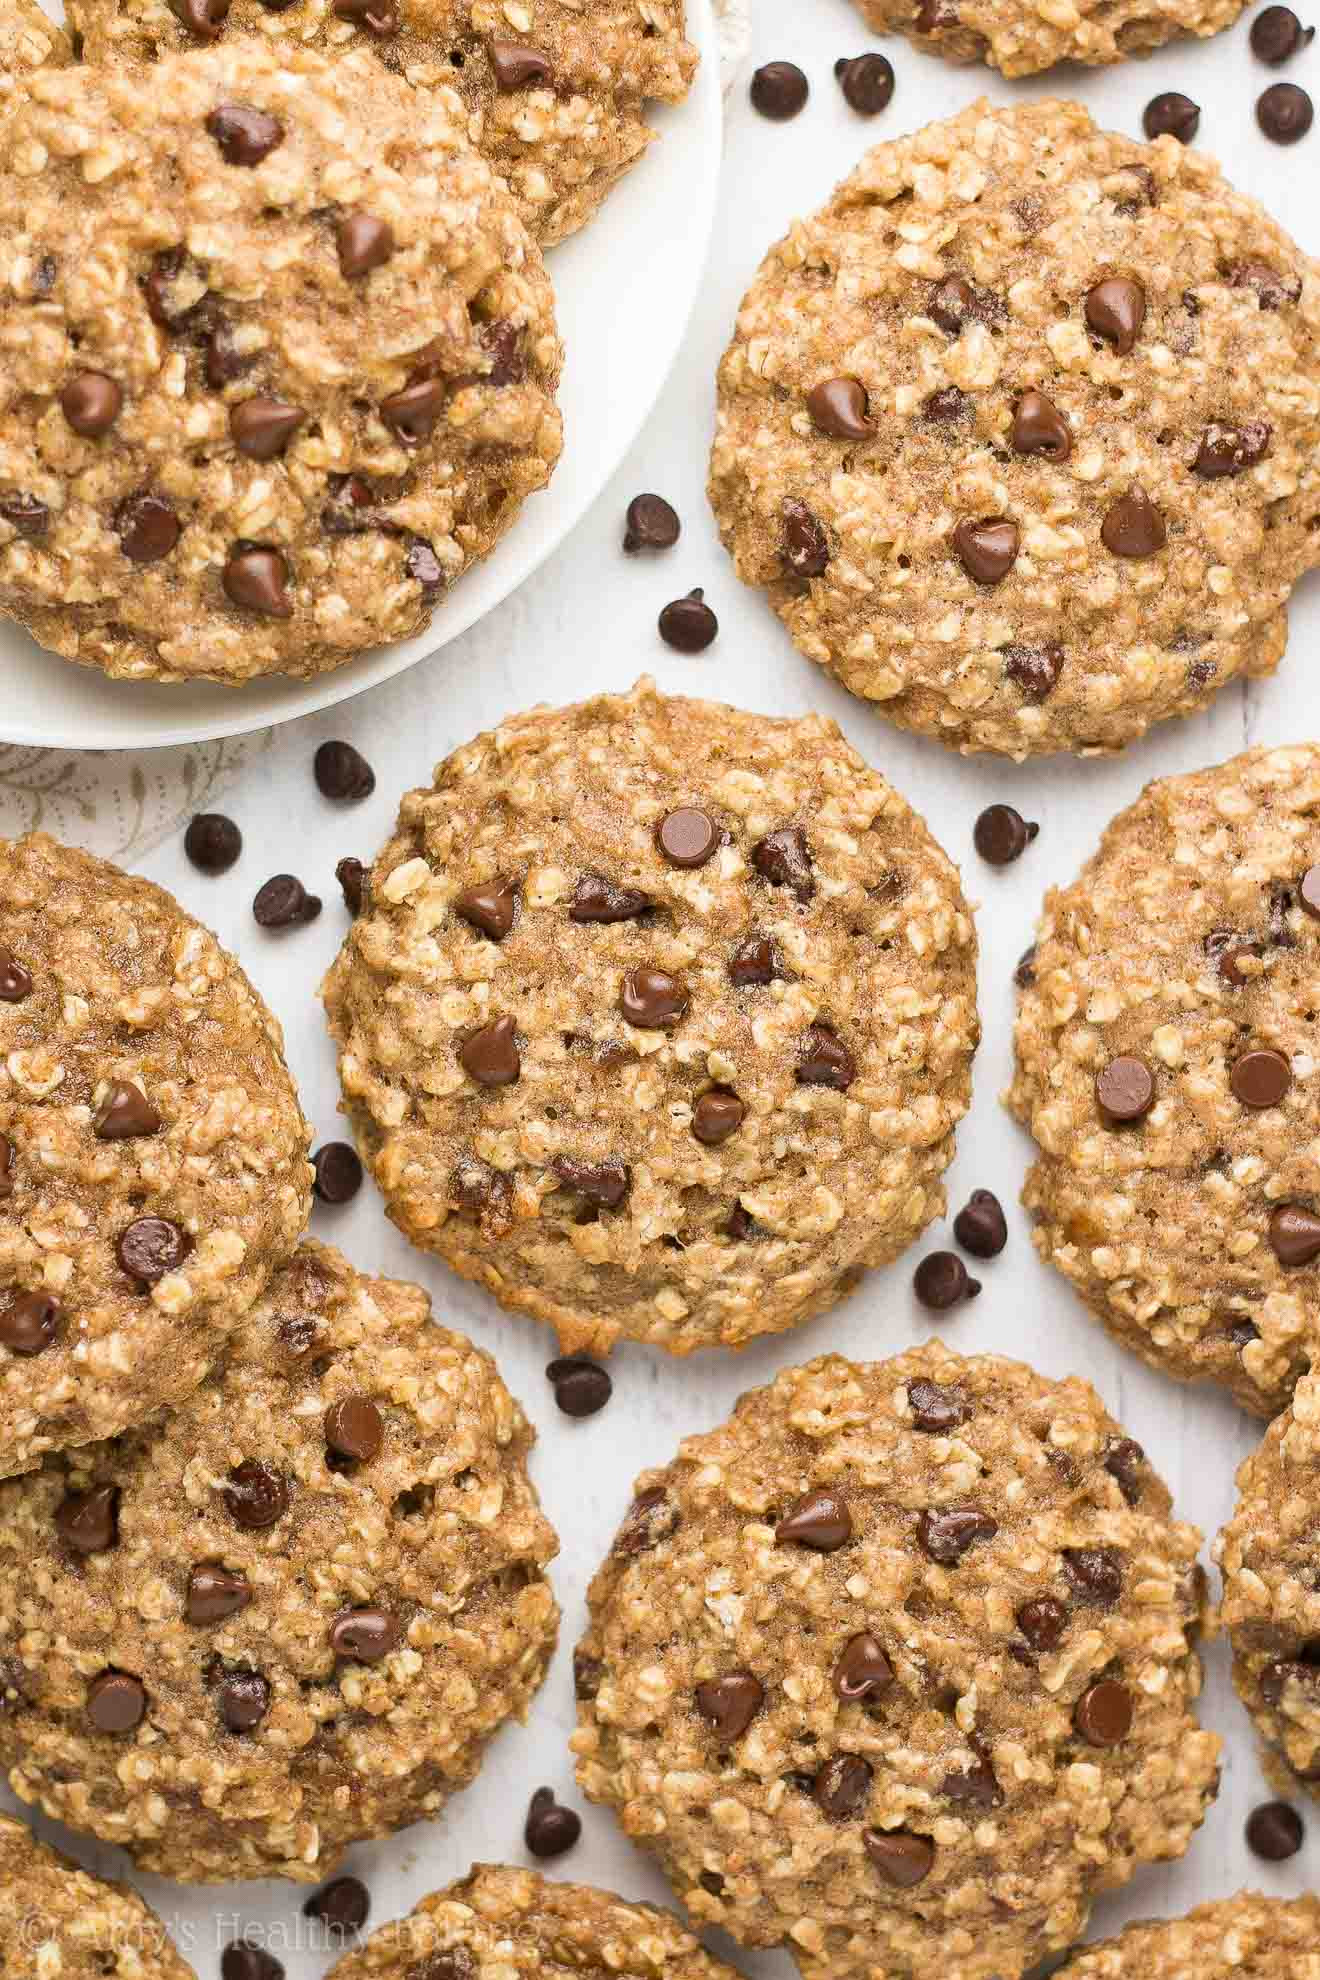 Chocolate Chip Oatmeal Cookies Healthy
 Healthy Caramel Chocolate Chip Oatmeal Cookies